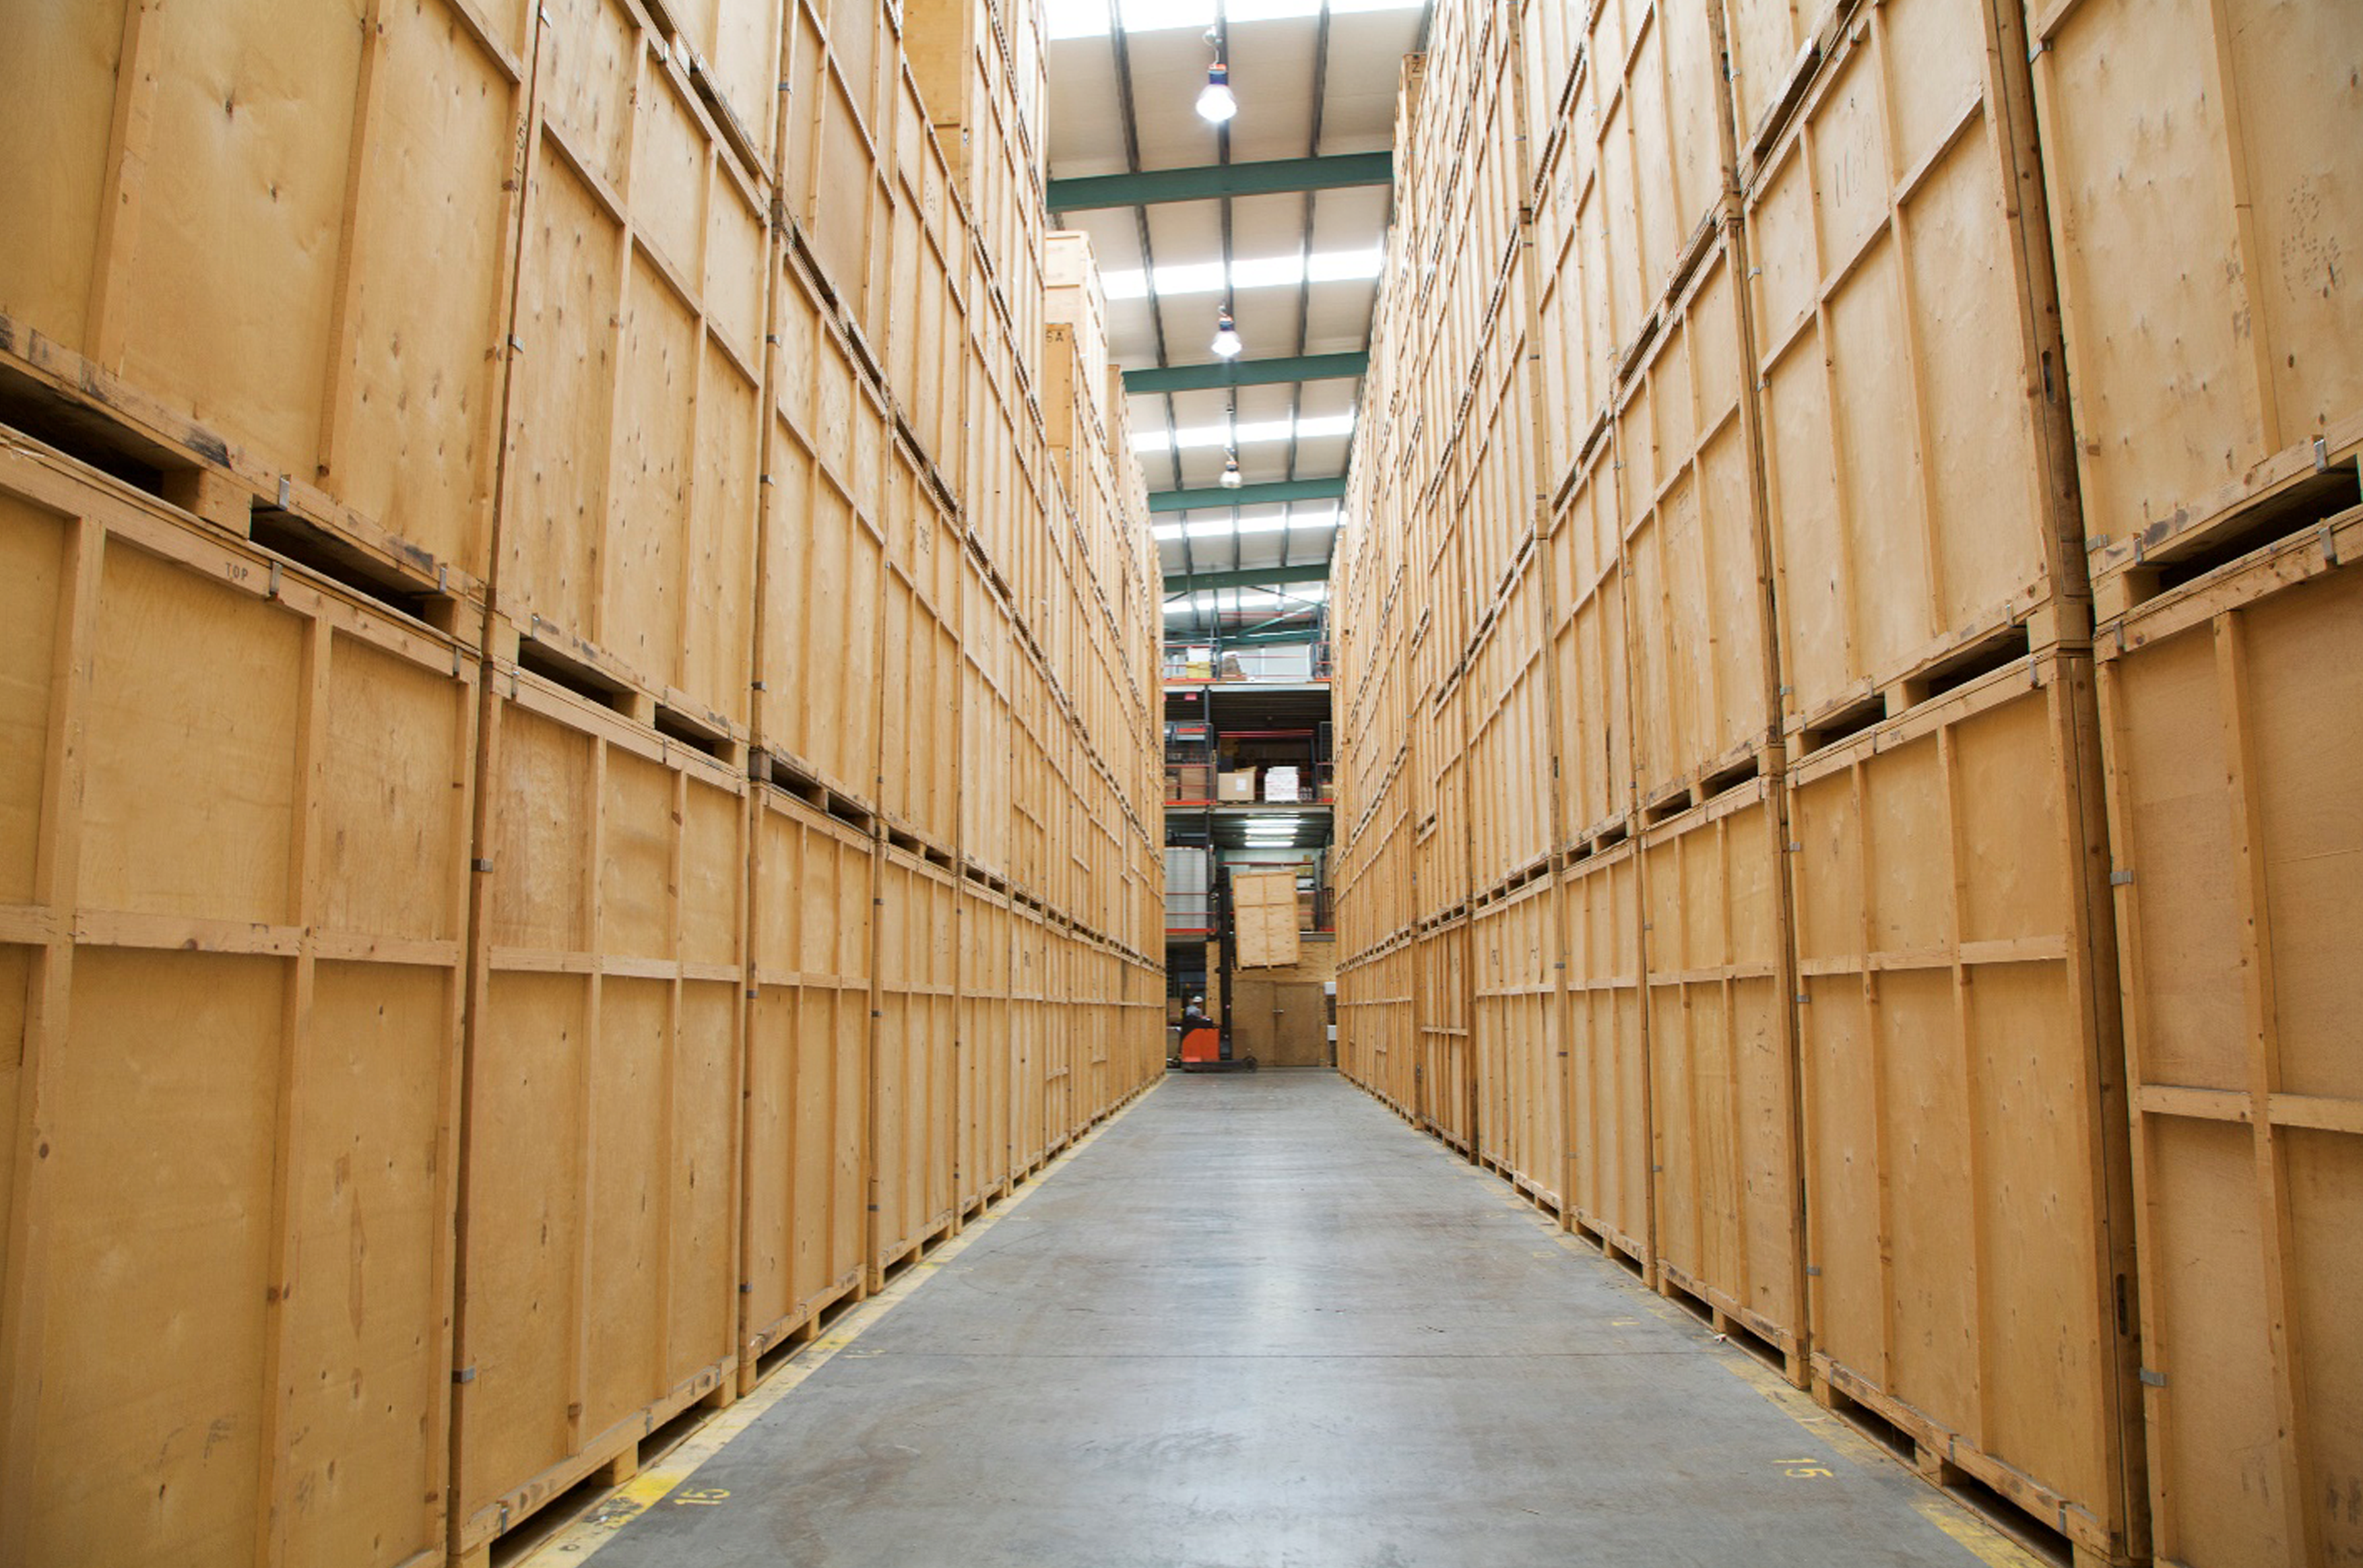 An aisle of wooden shipping containers in a storage facility